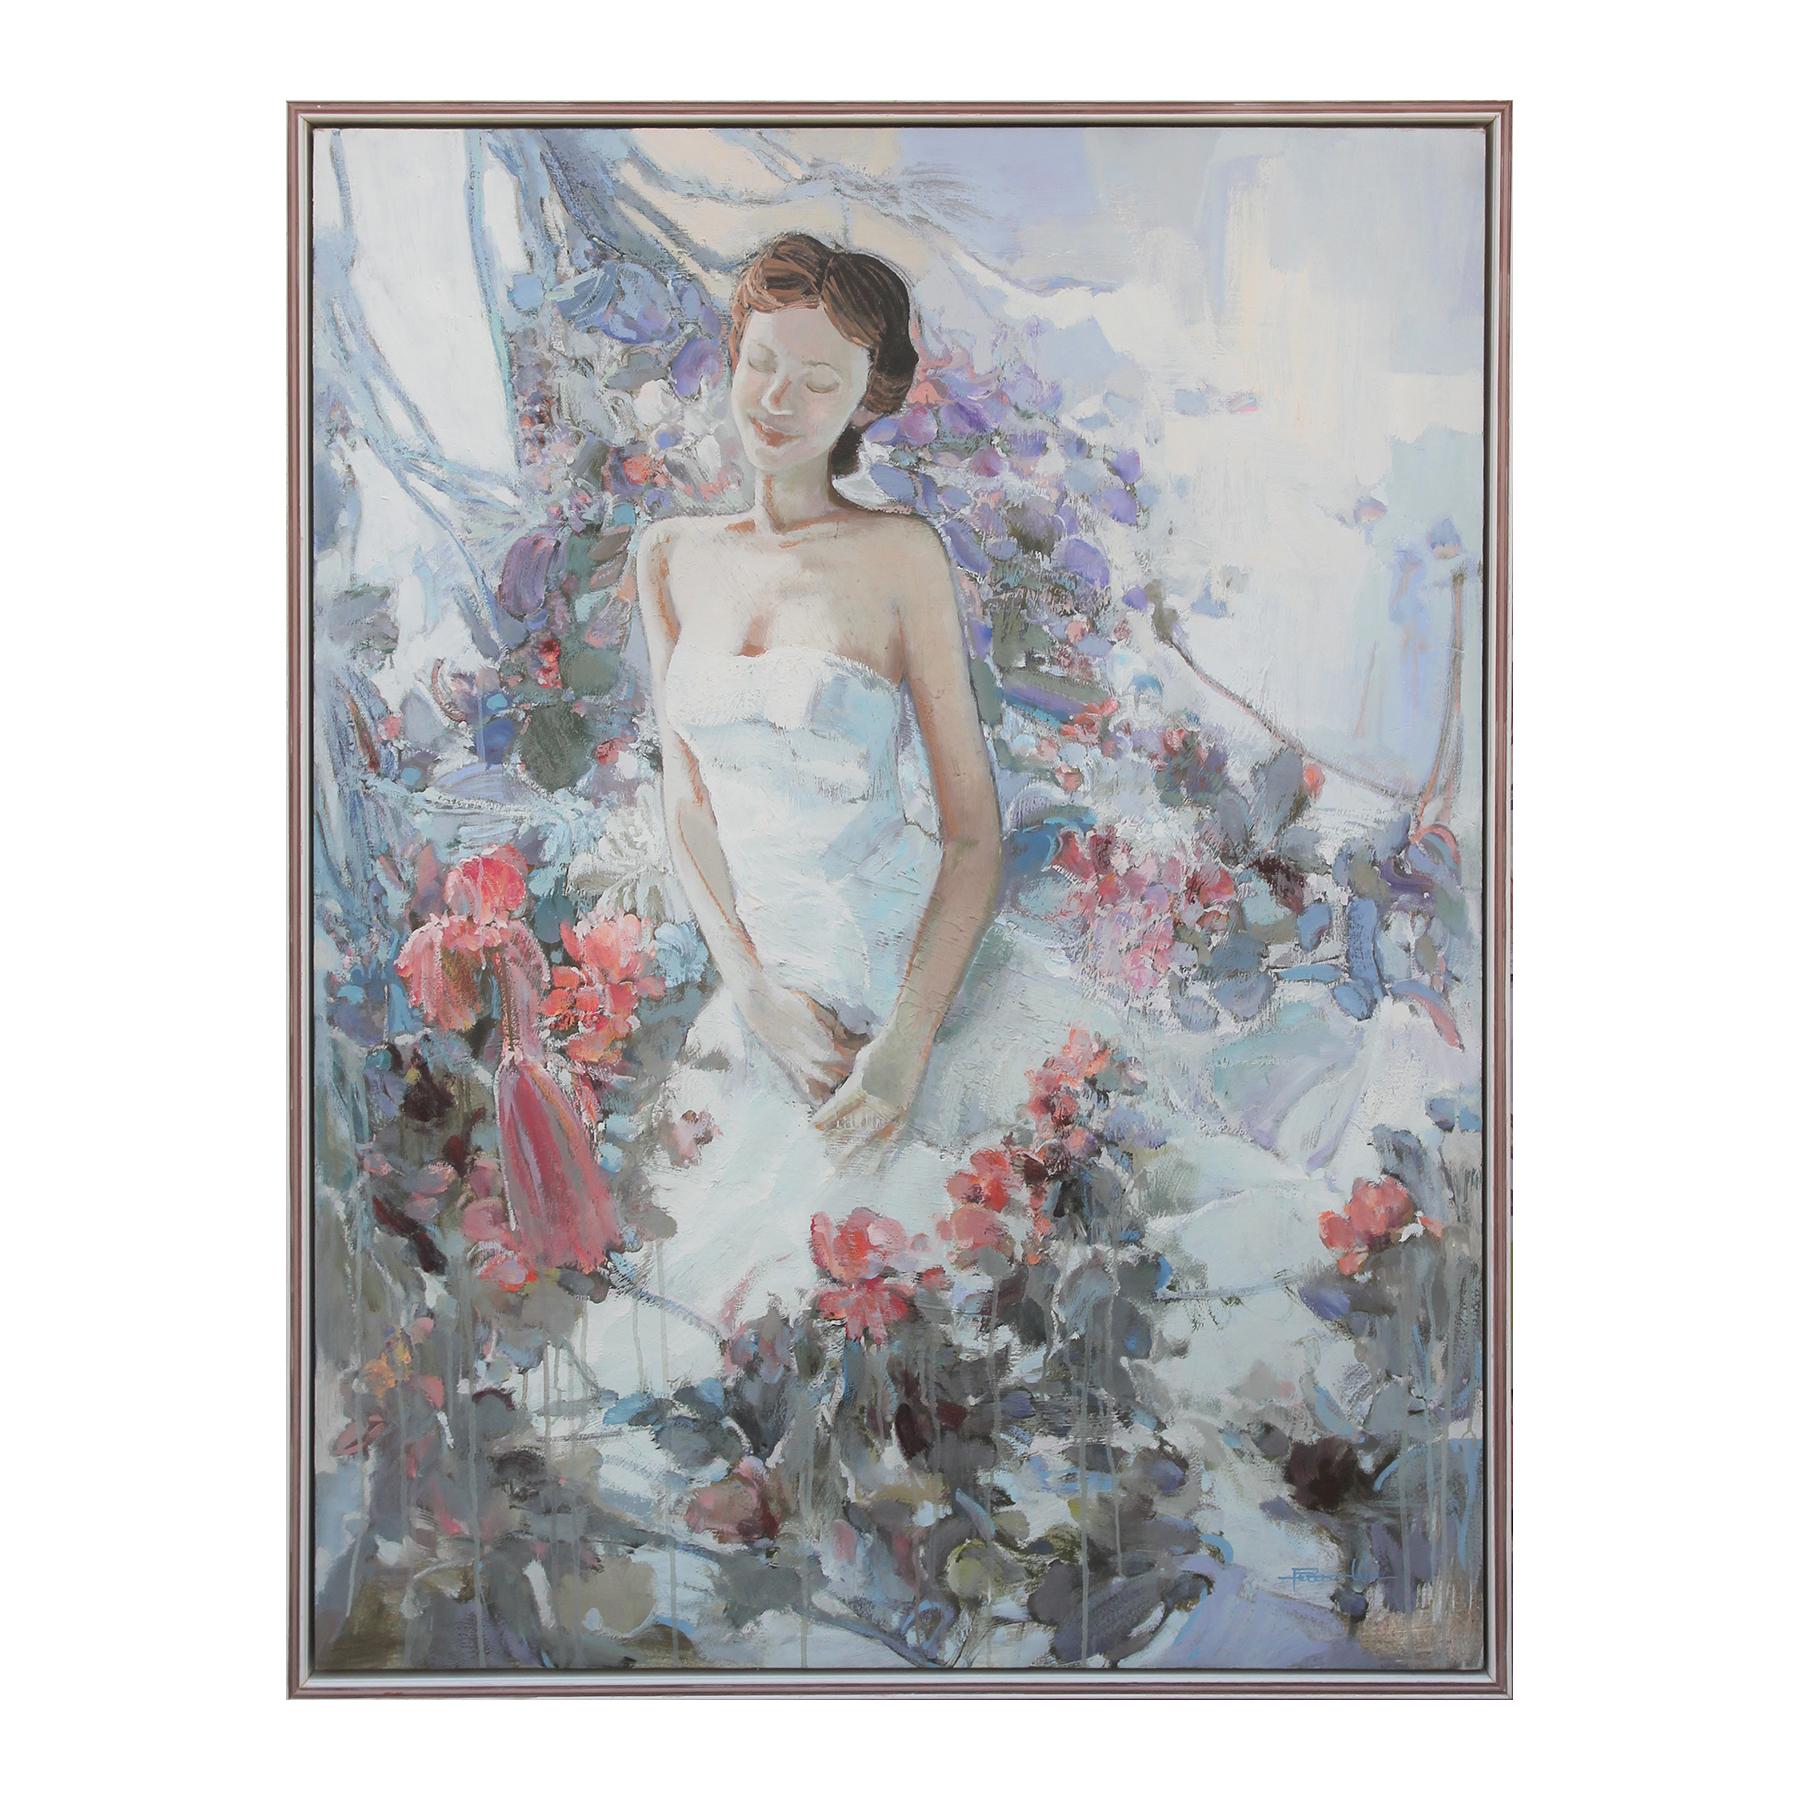 Peter Wu Figurative Painting - “Sweet Quiet” Large Abstract Pastel Floral Portrait of Female in White Dress 